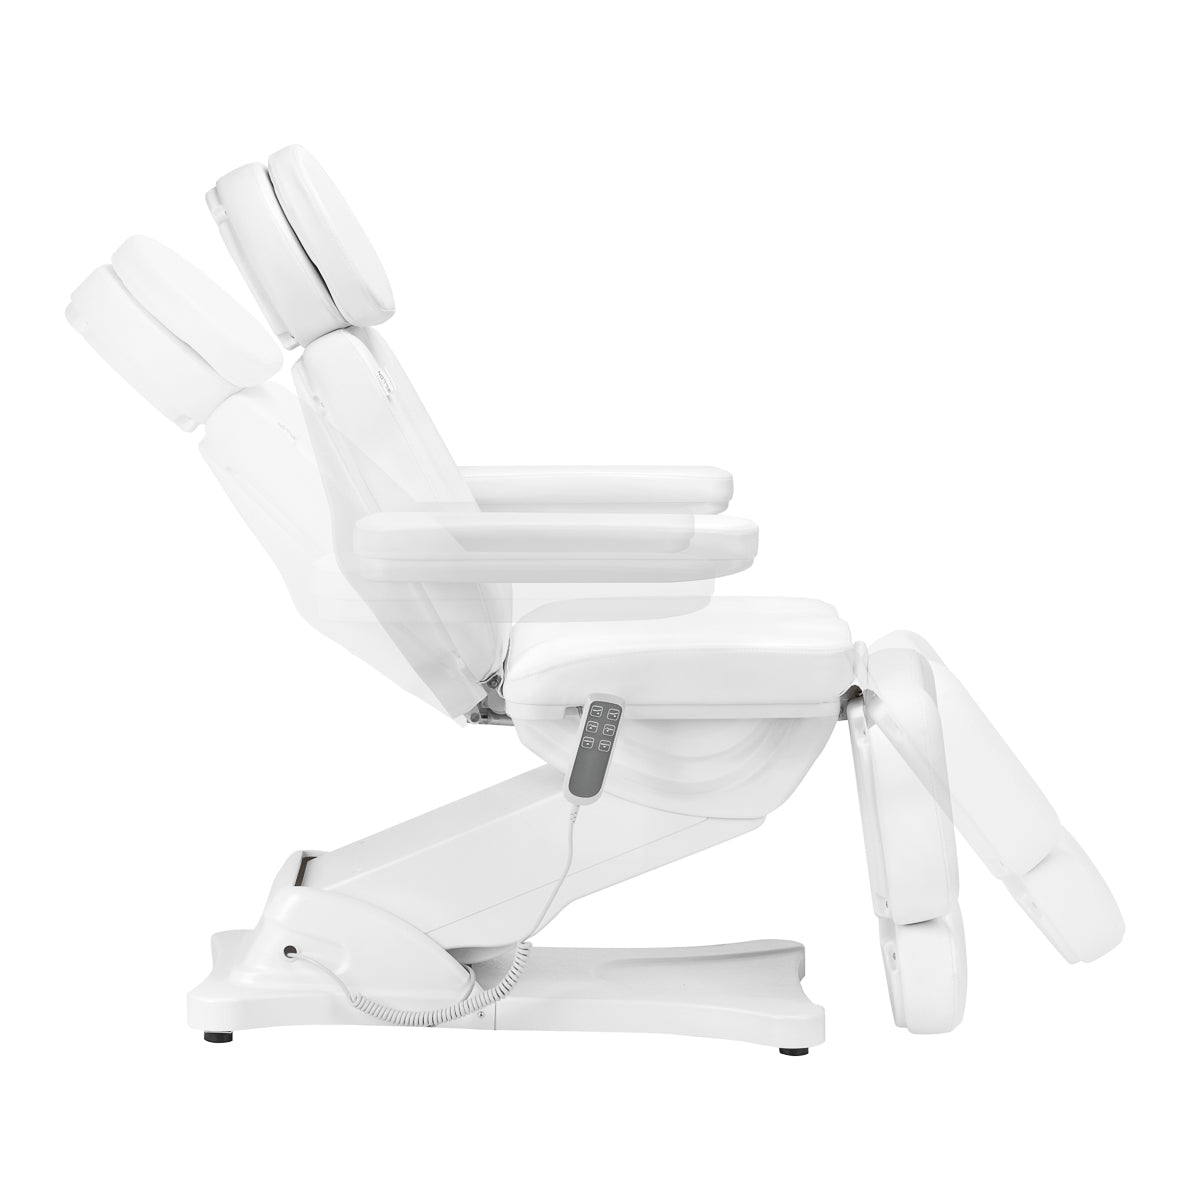 Sillon Electric Cosmetic Chair Classic 3 Motors White